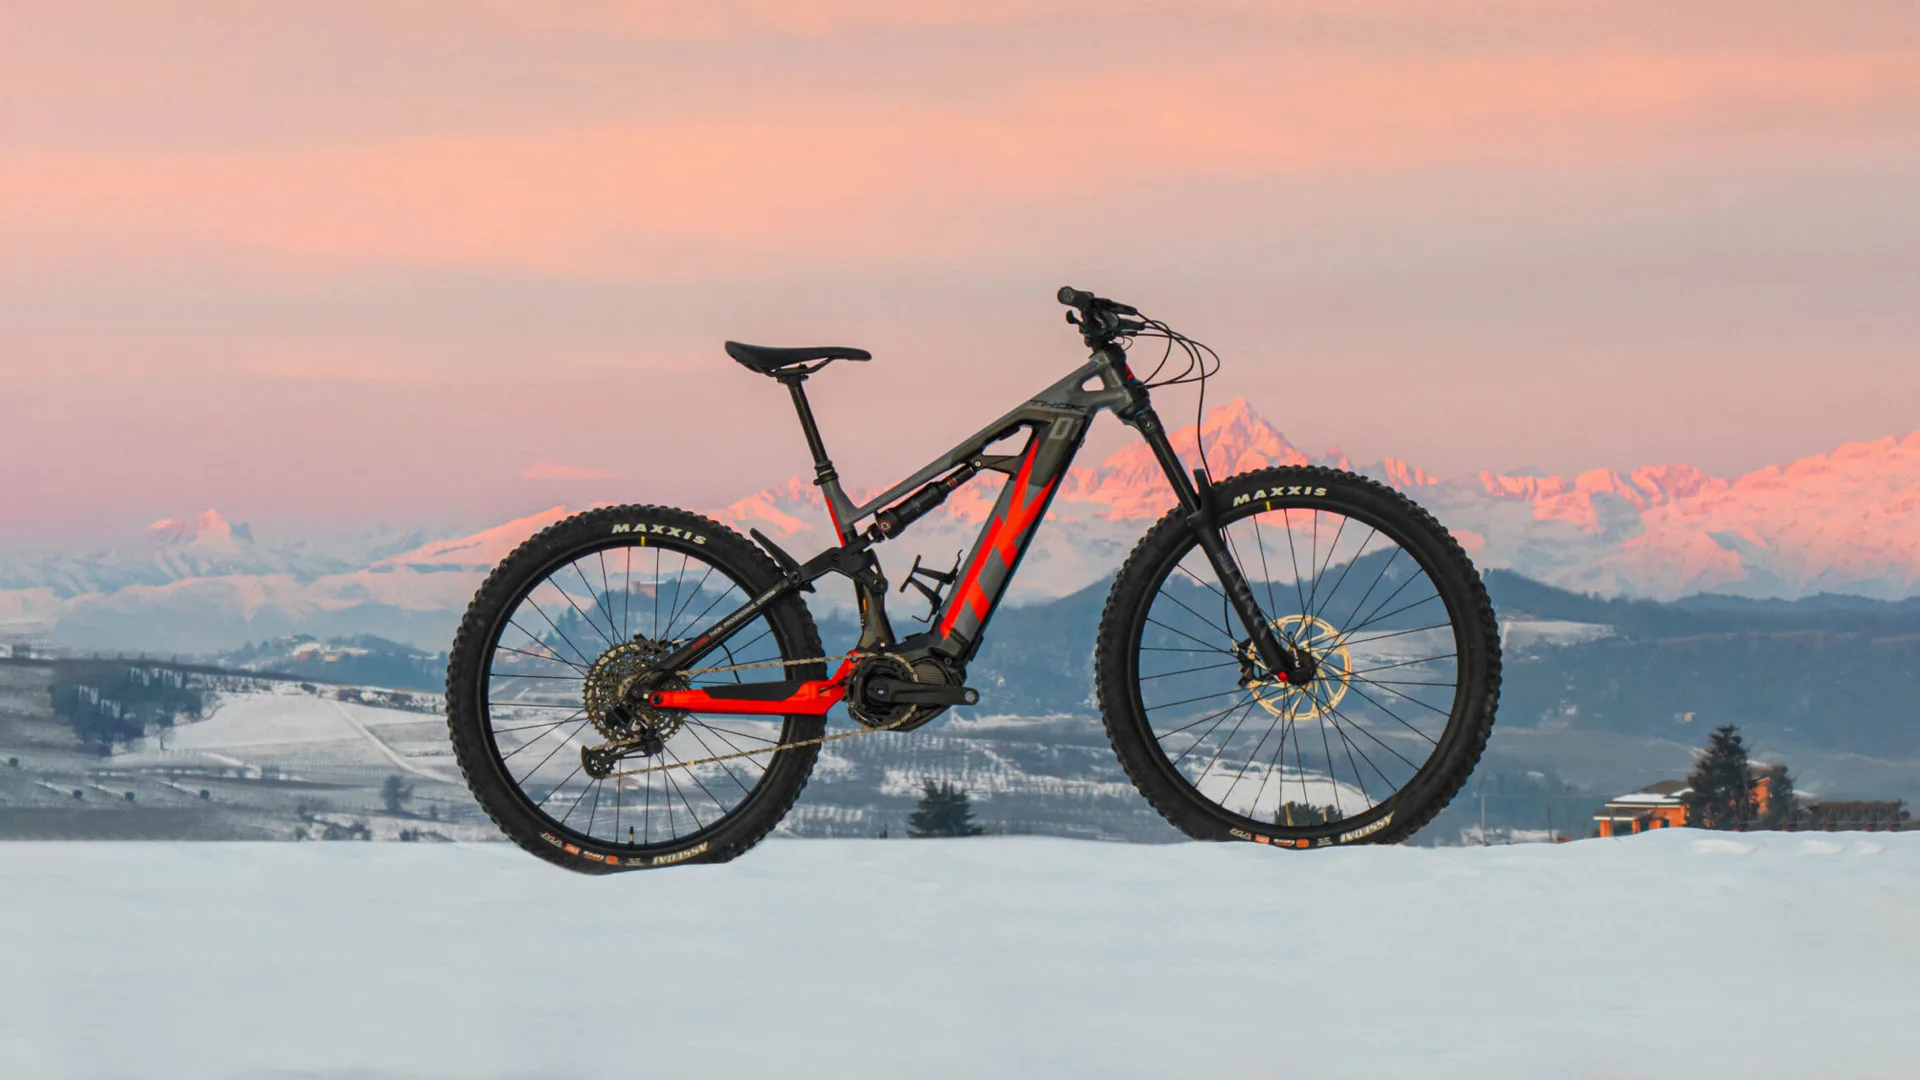 Thok news - E-BIKES AND WINTER: DIRECTIONS FOR USE